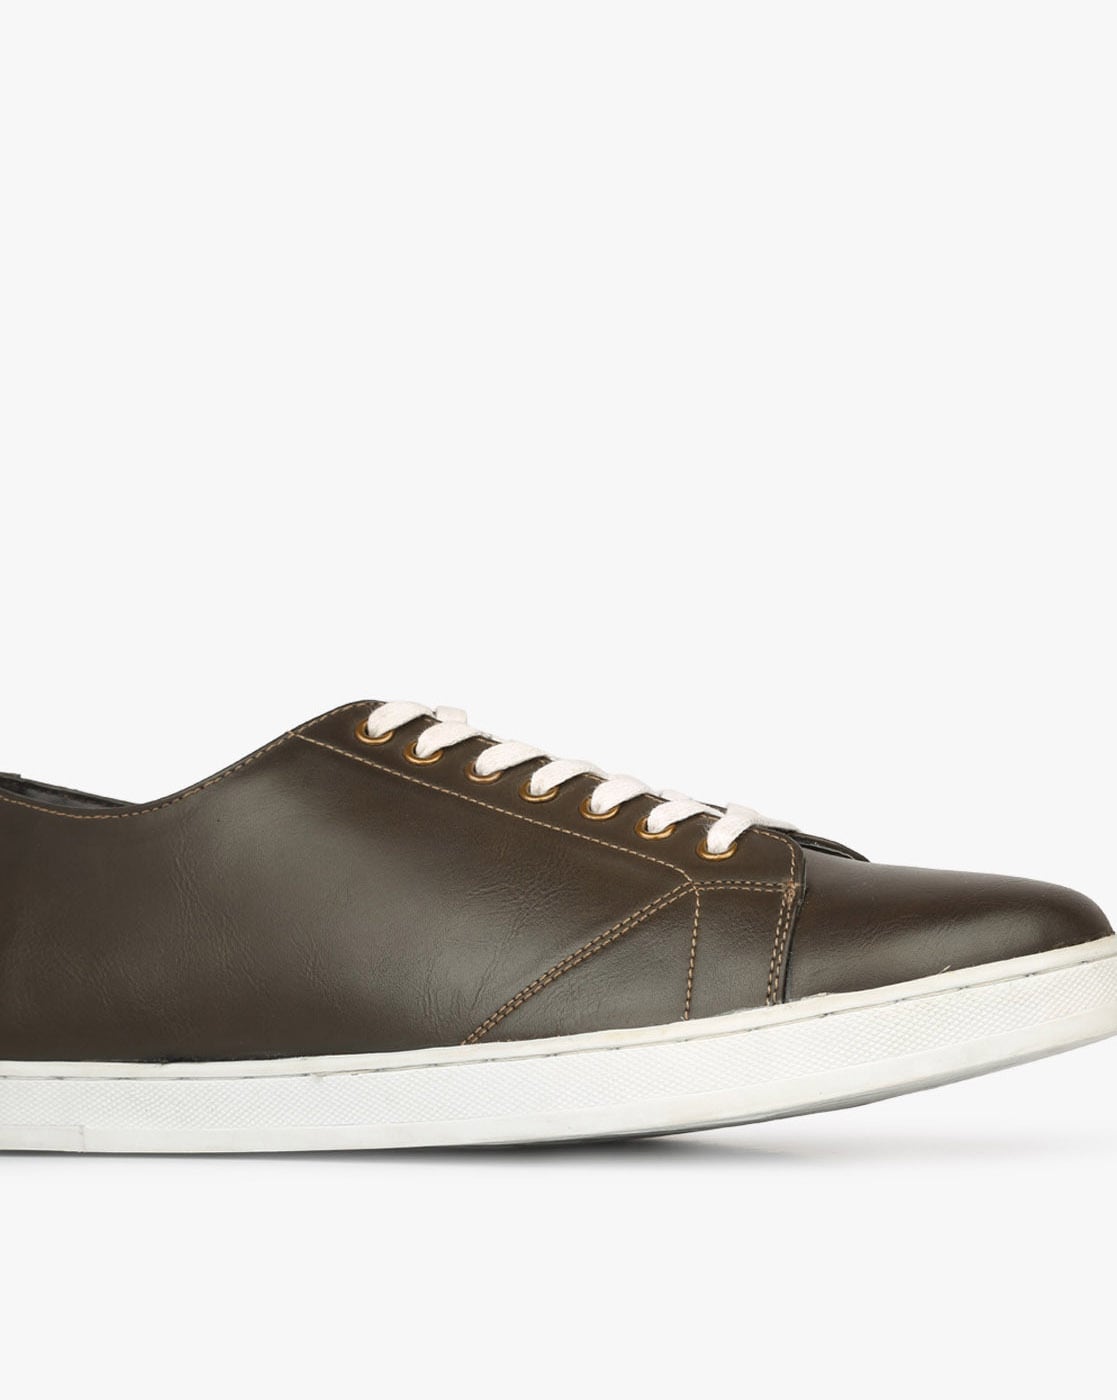 allen solly brown casual shoes